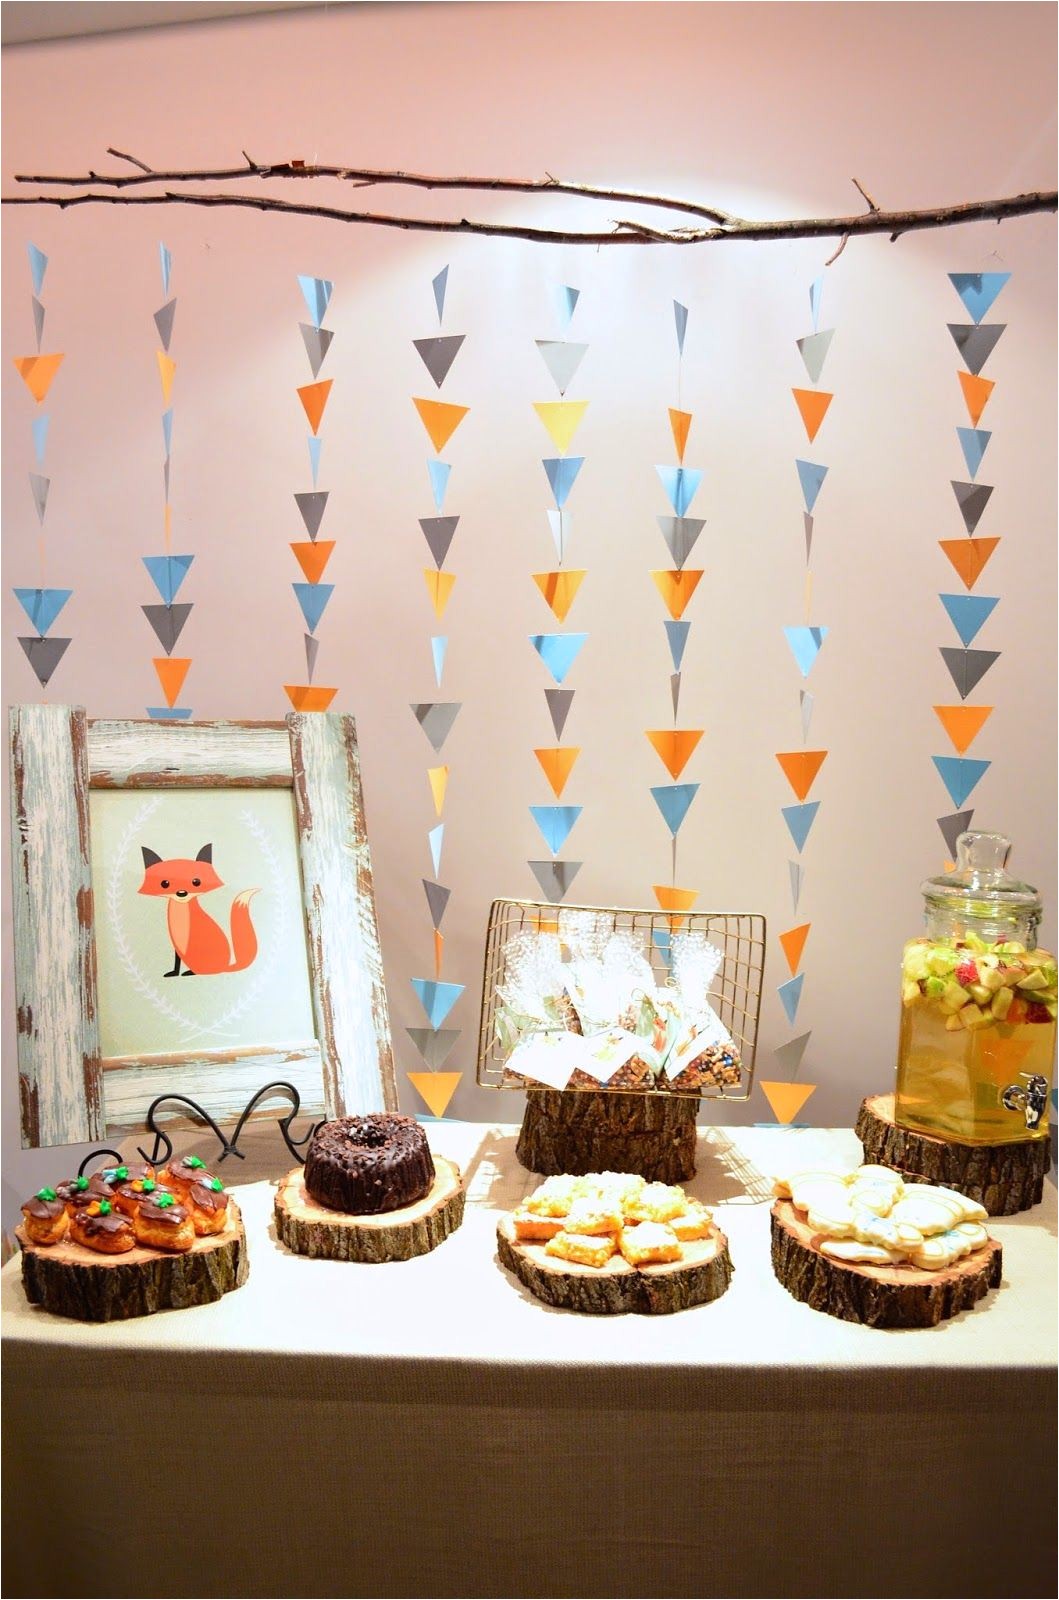 decorations love the simple triangle garland backdrop the wood slice platters and the framed artwork